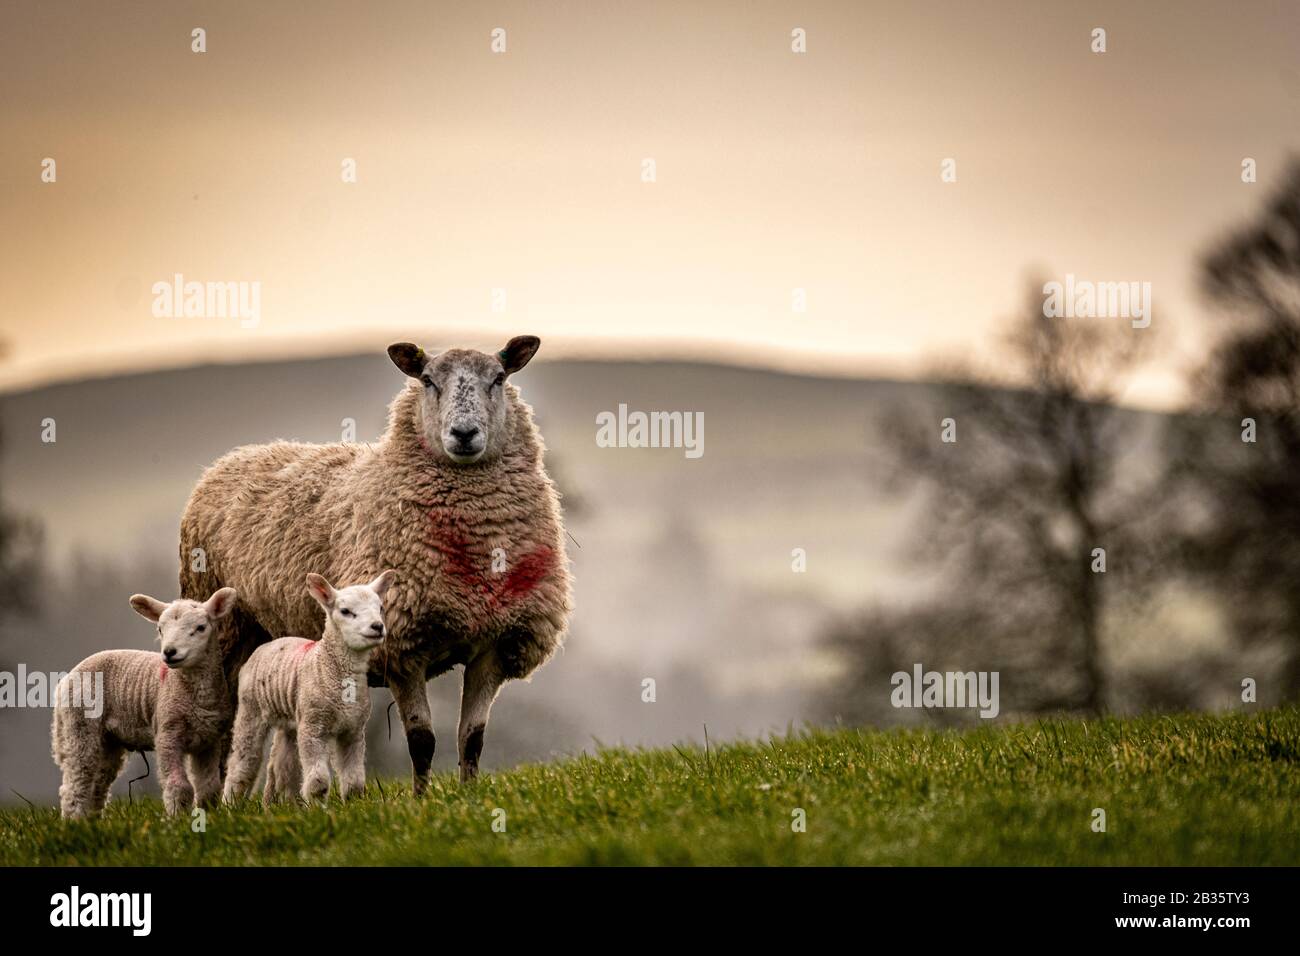 Early spring lambs in the fields above Spark Bridge on the edge of the Lake District.  Fujifilm X-T3, Fujinon 100-400 f4.0-5.6 @ 400mm, f=5.6, 1/320th Stock Photo